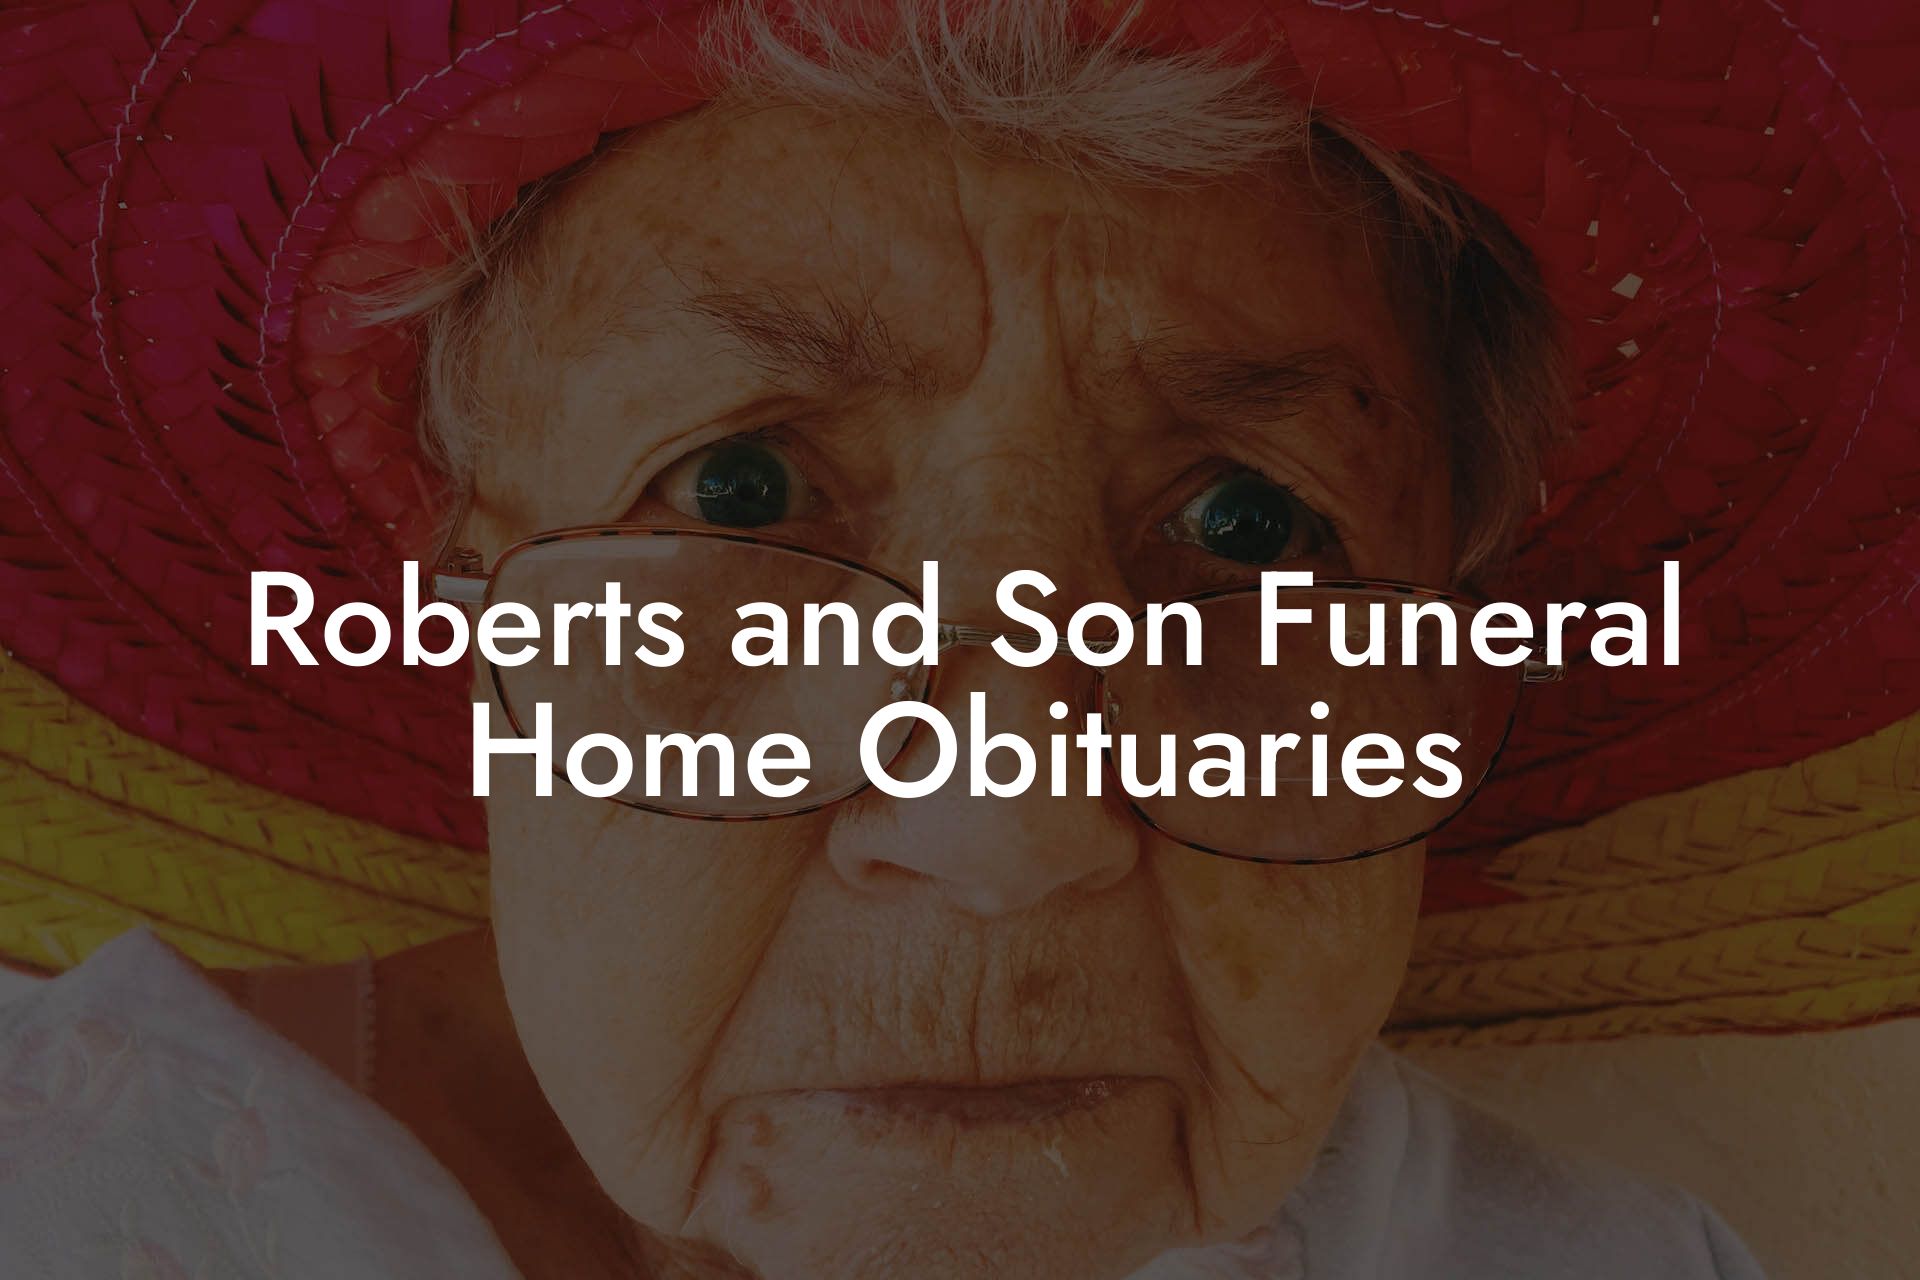 Roberts and Son Funeral Home Obituaries